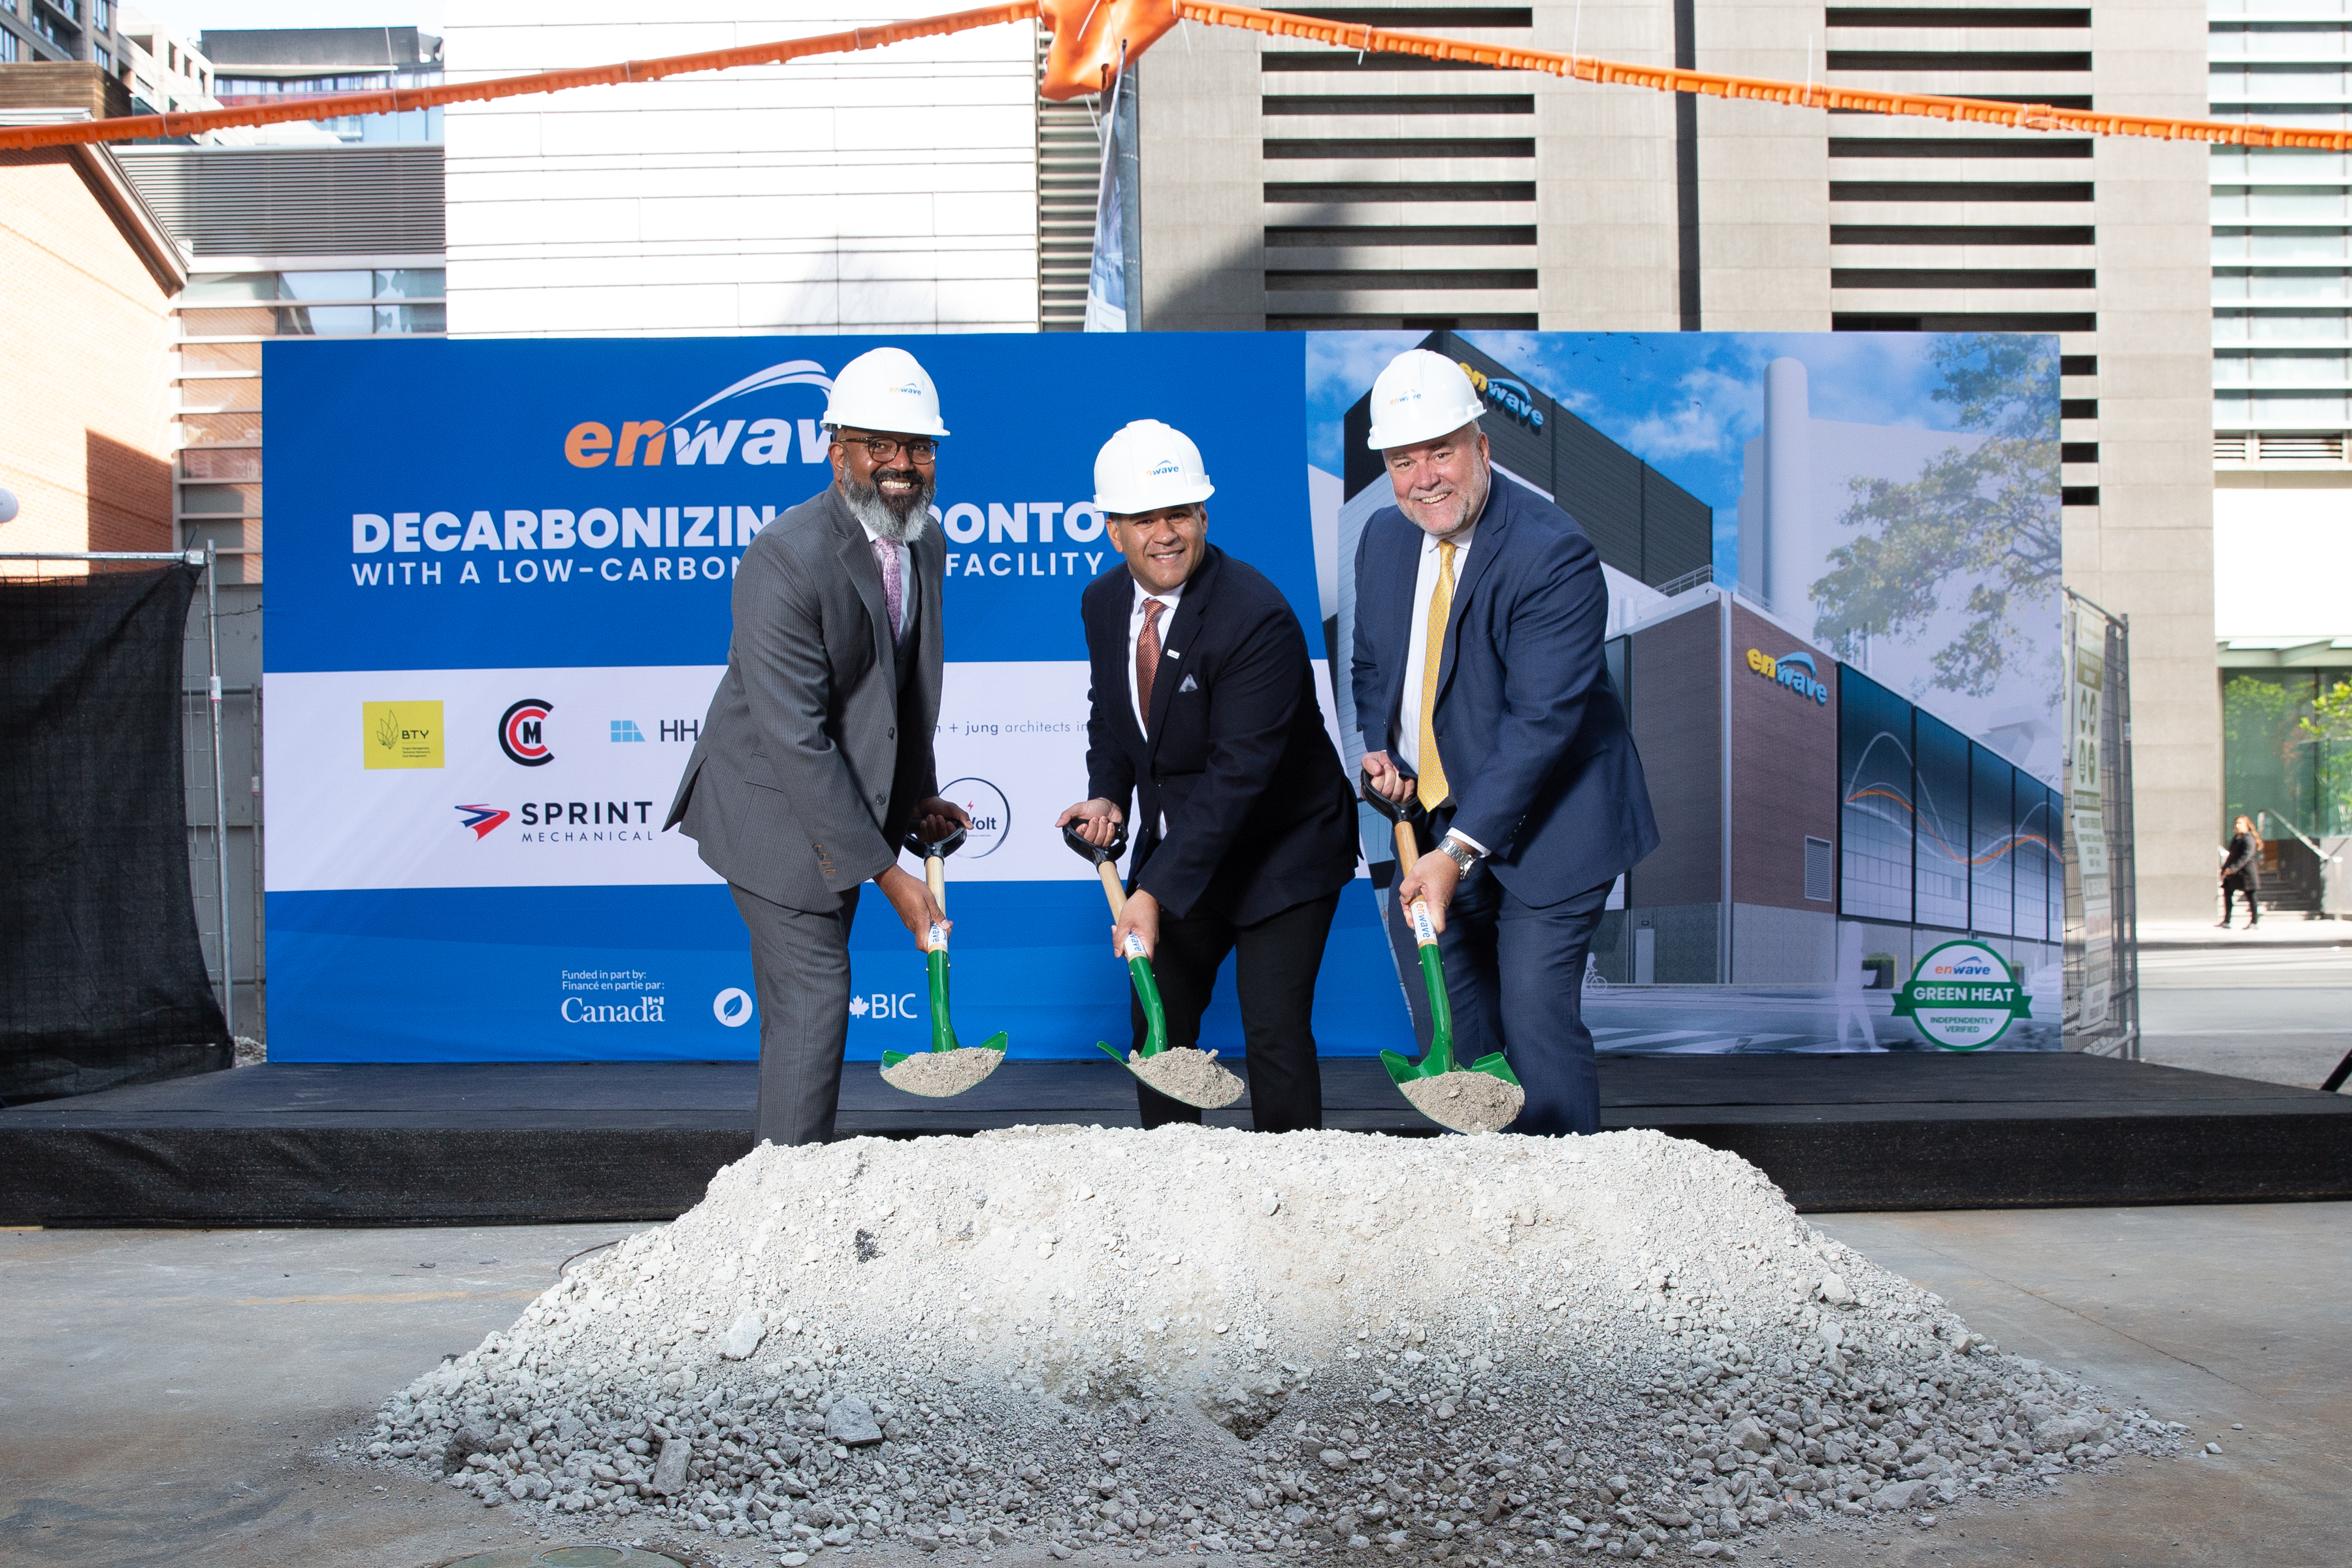 Left-right: Sashen Guneratna (Managing Director, Investments, Canada Infrastructure Bank), Carlyle Coutinho (CEO, Enwave Energy Corporation), and Todd Smith (Minister of Energy, Government of Ontario).